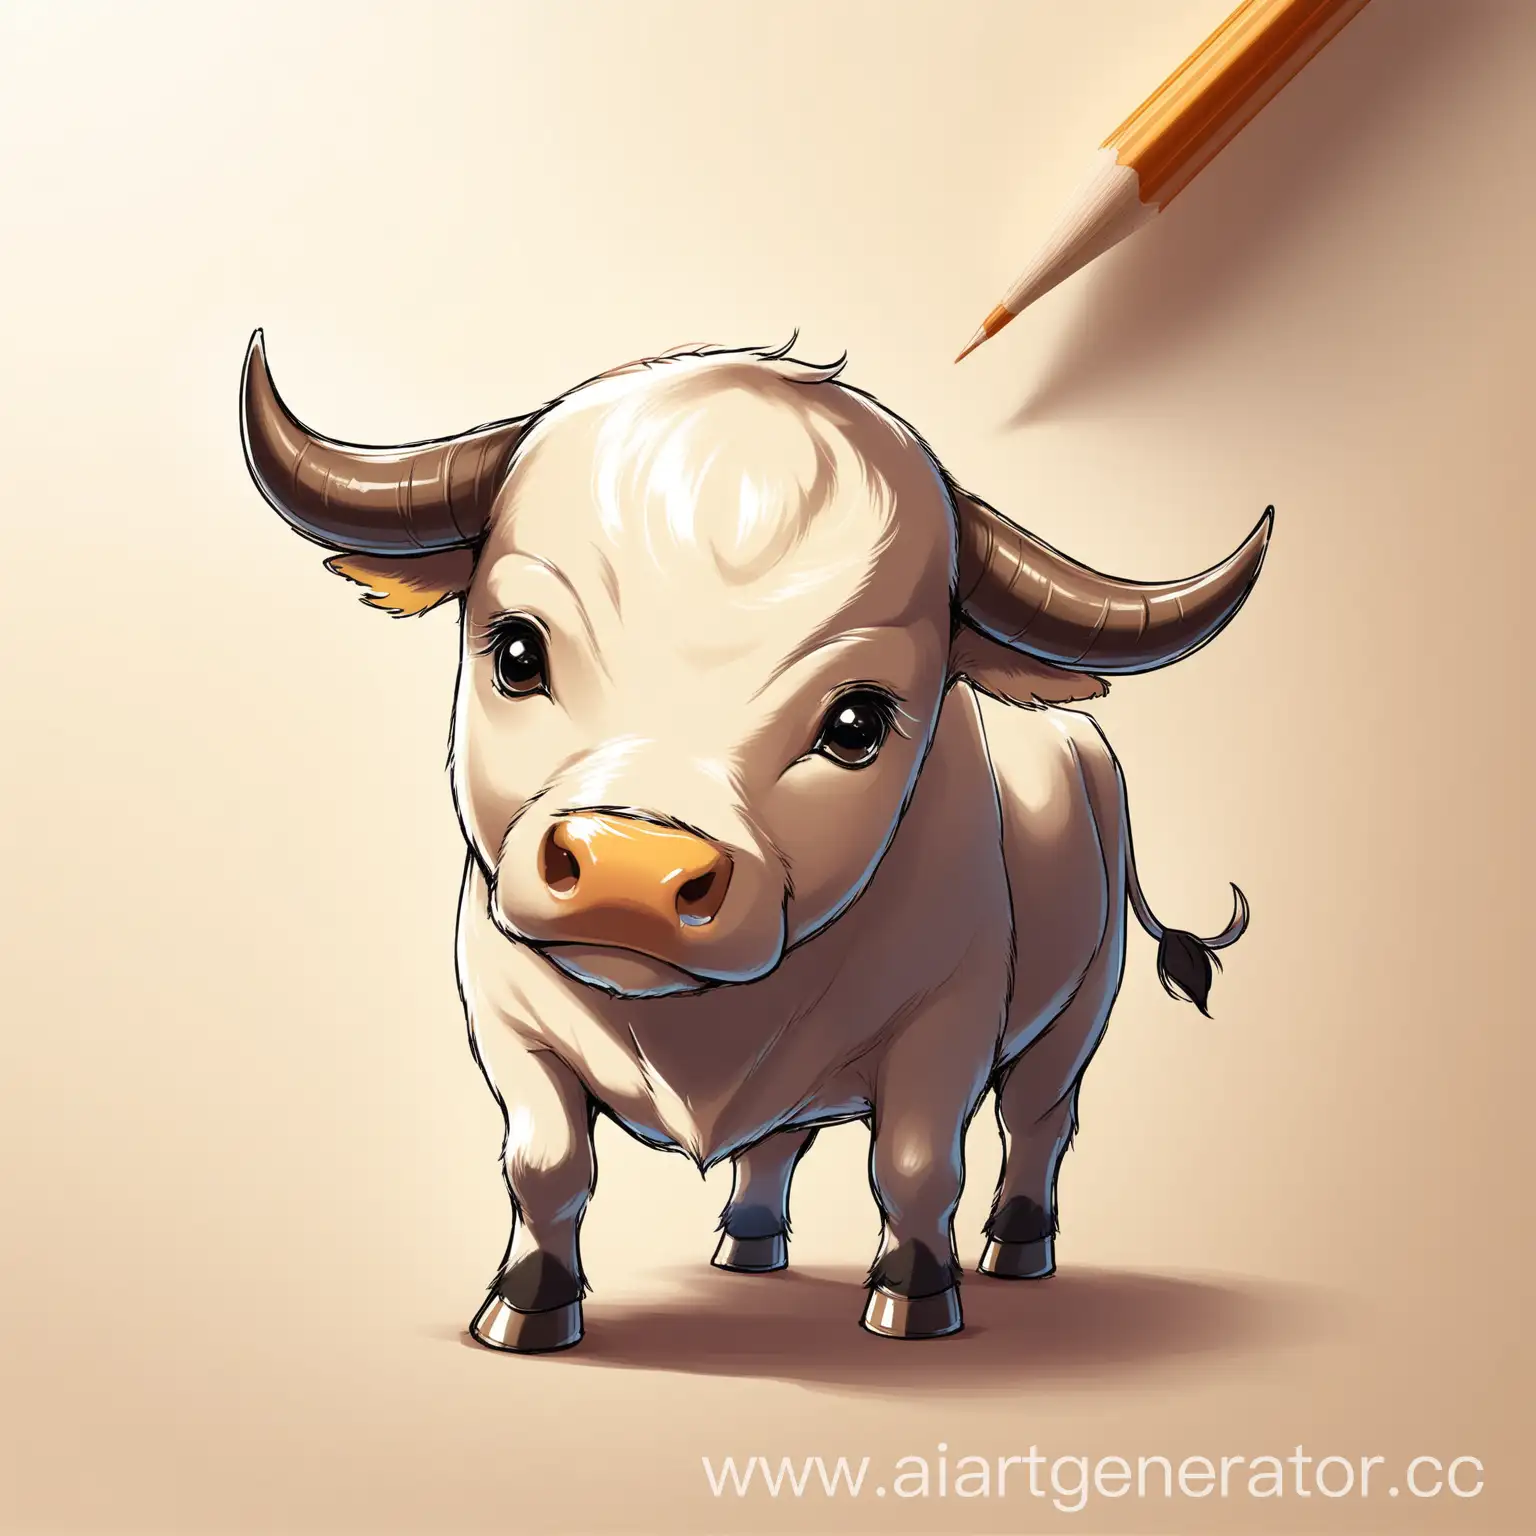 Adorable-Little-Bull-Sketch-Childlike-Drawing-of-a-Cute-Bull